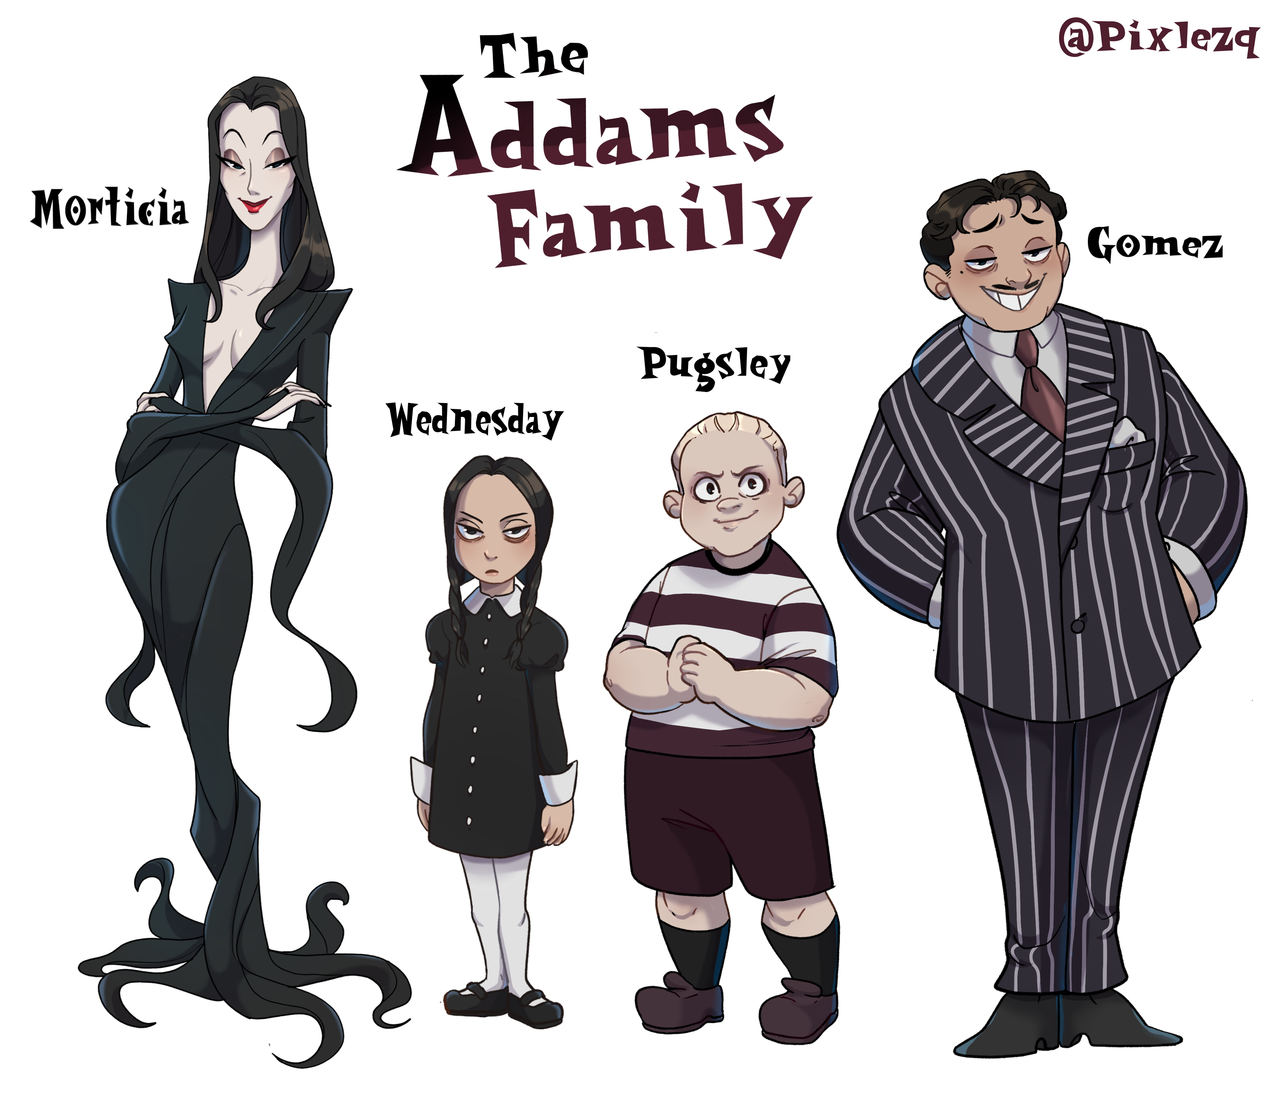 art and the new addams family | Tumblr